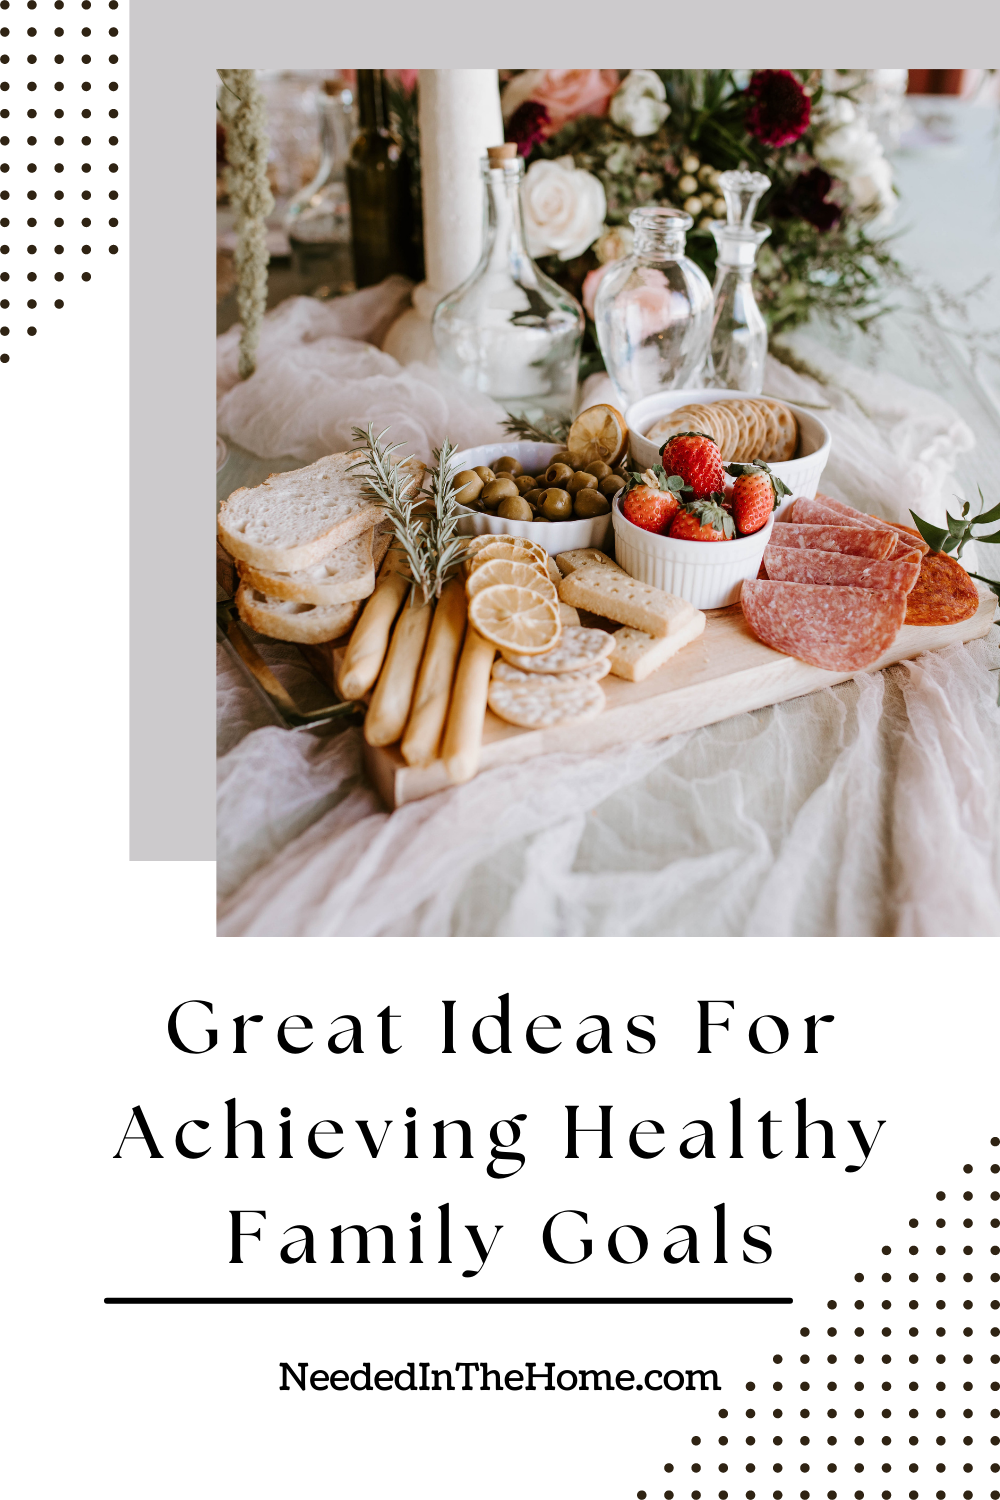 pinterest-pin-description great ideas for achieving healthy family goals spread of healthy food and flowers neededinthehome